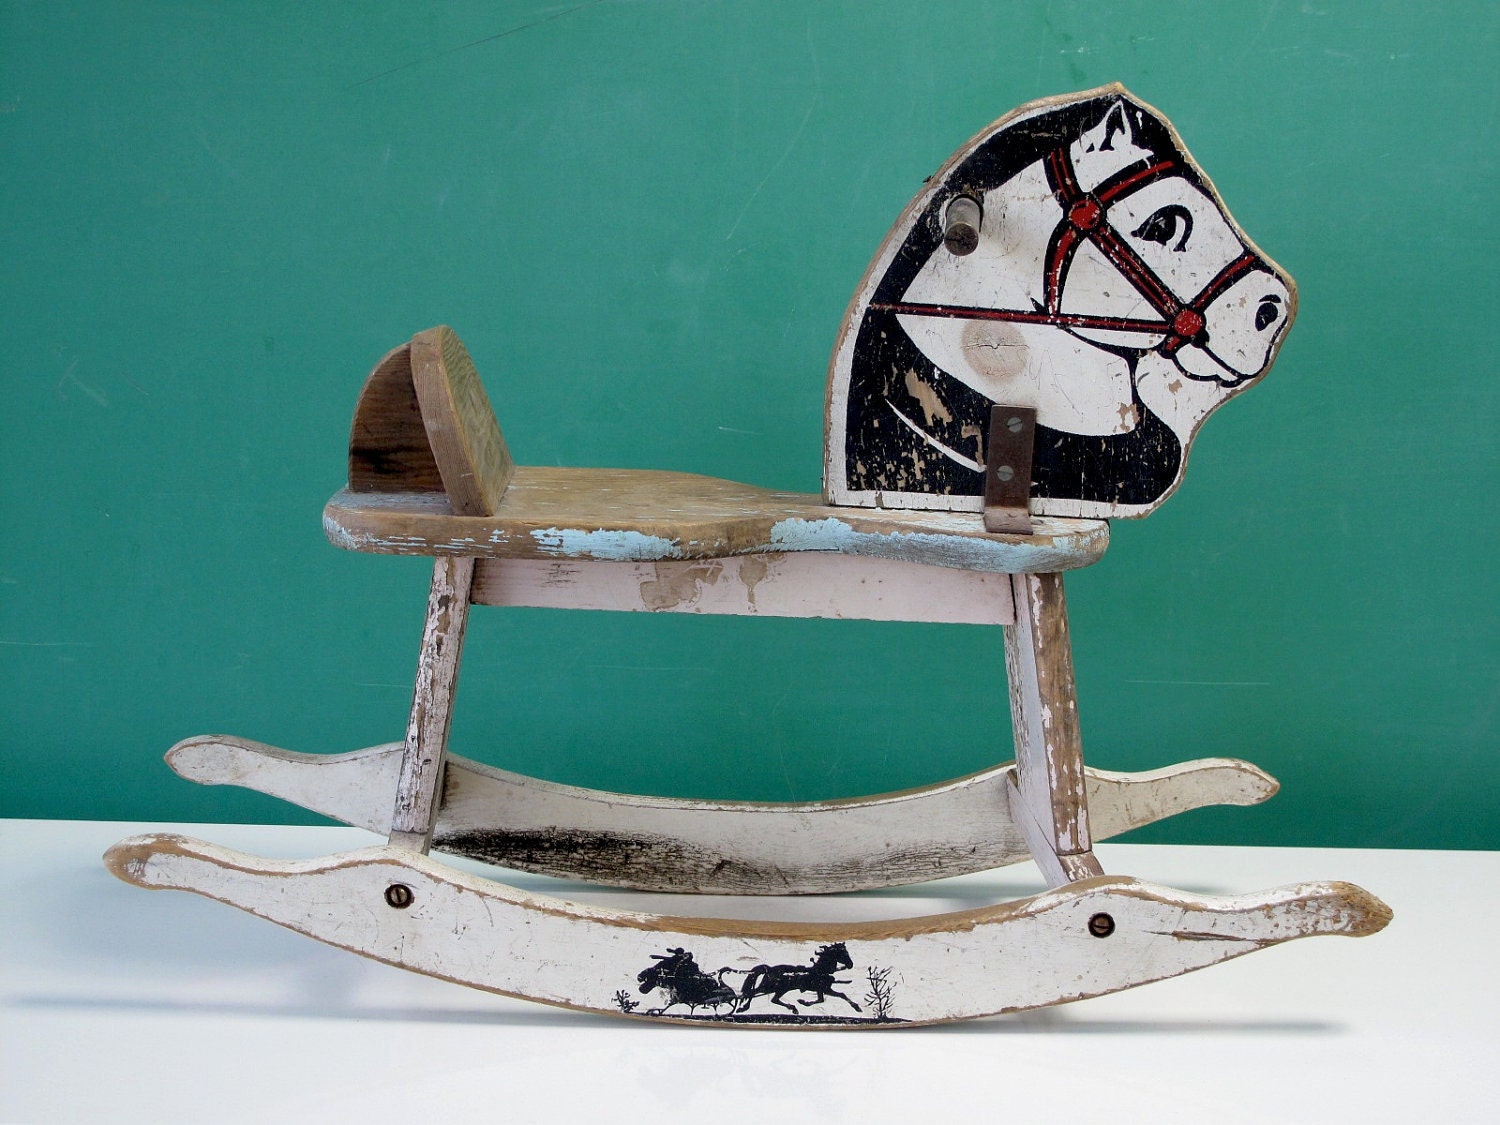 Charming 1950's Child's Rocking Horse Toy, Painted, Chippy, Rustic, White, Black, Light Blue - CathodeBlue